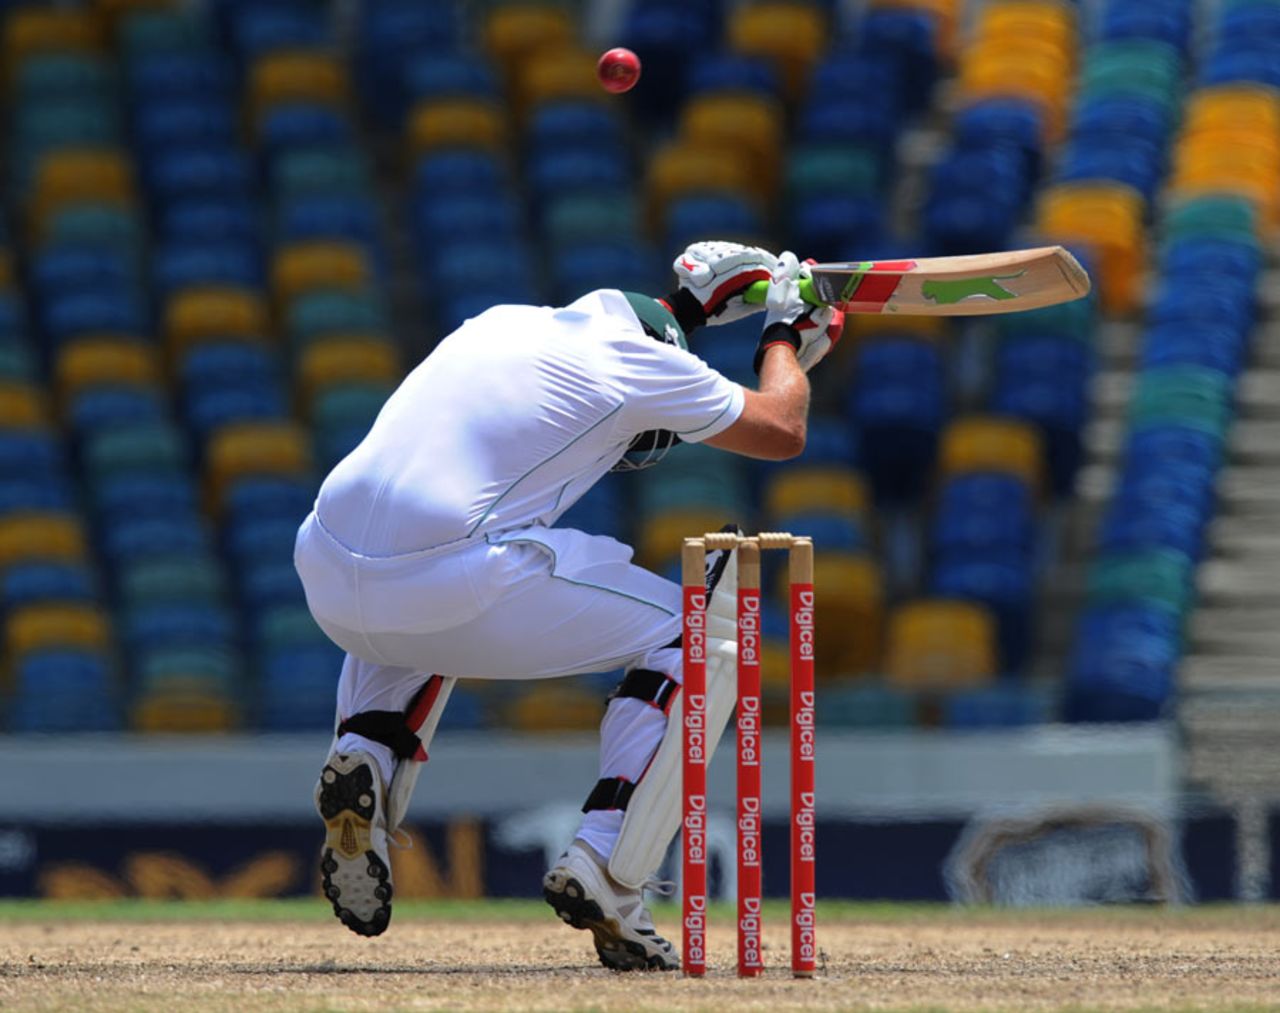 Jacques Kallis ducks a bouncer from Kemar Roach, West Indies v South Africa, 3rd Test, Barbados, 4th day, June 29, 2010 